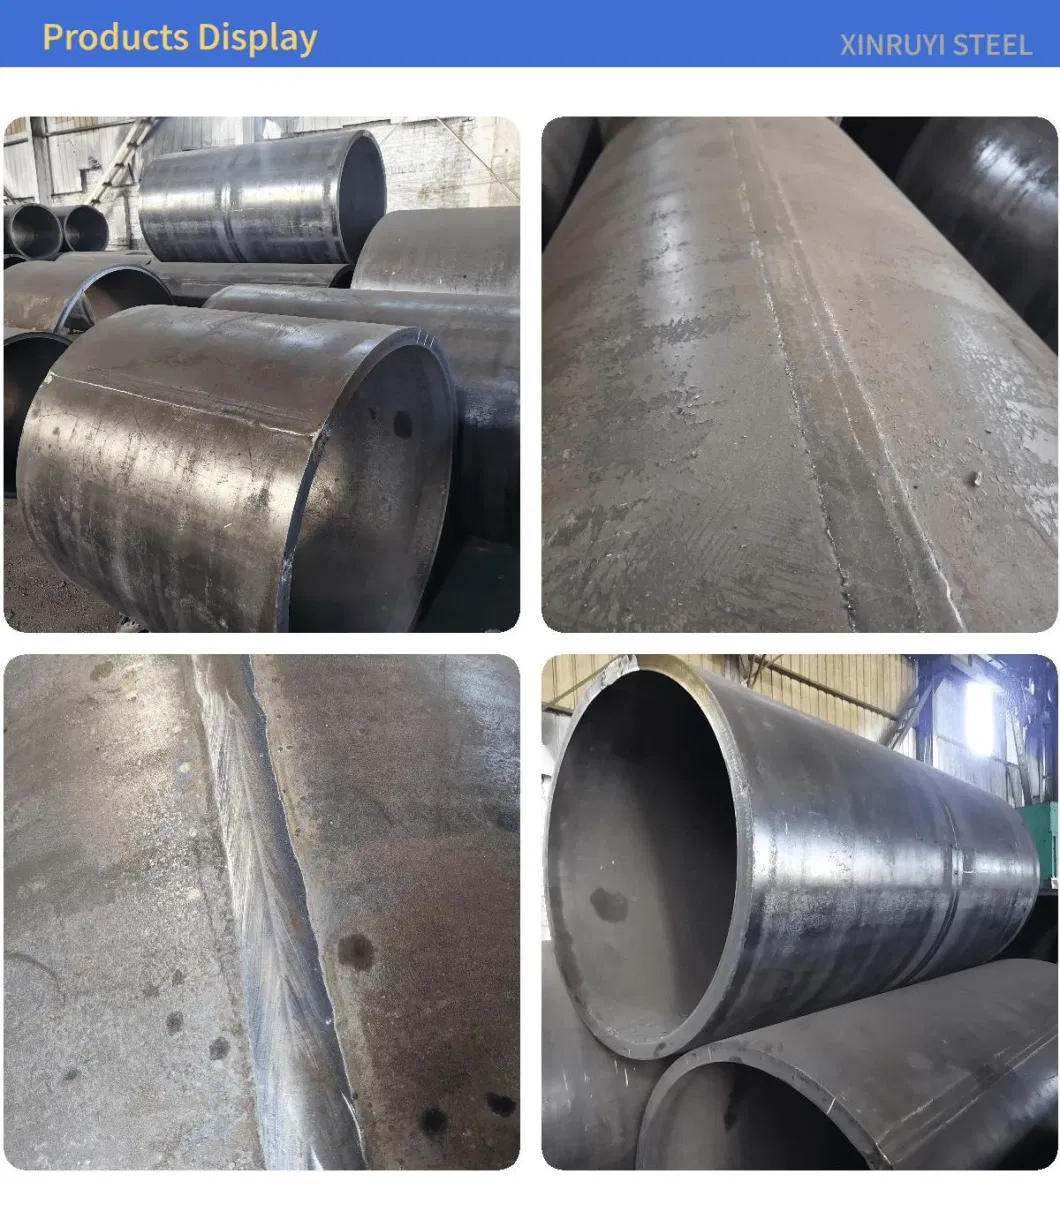 Thick Wall Thickness Wt Big Diameter Od Size Sch120 Sch160 30 Inch En 10219 ASTM A500 Welded ERW Steel Pipe